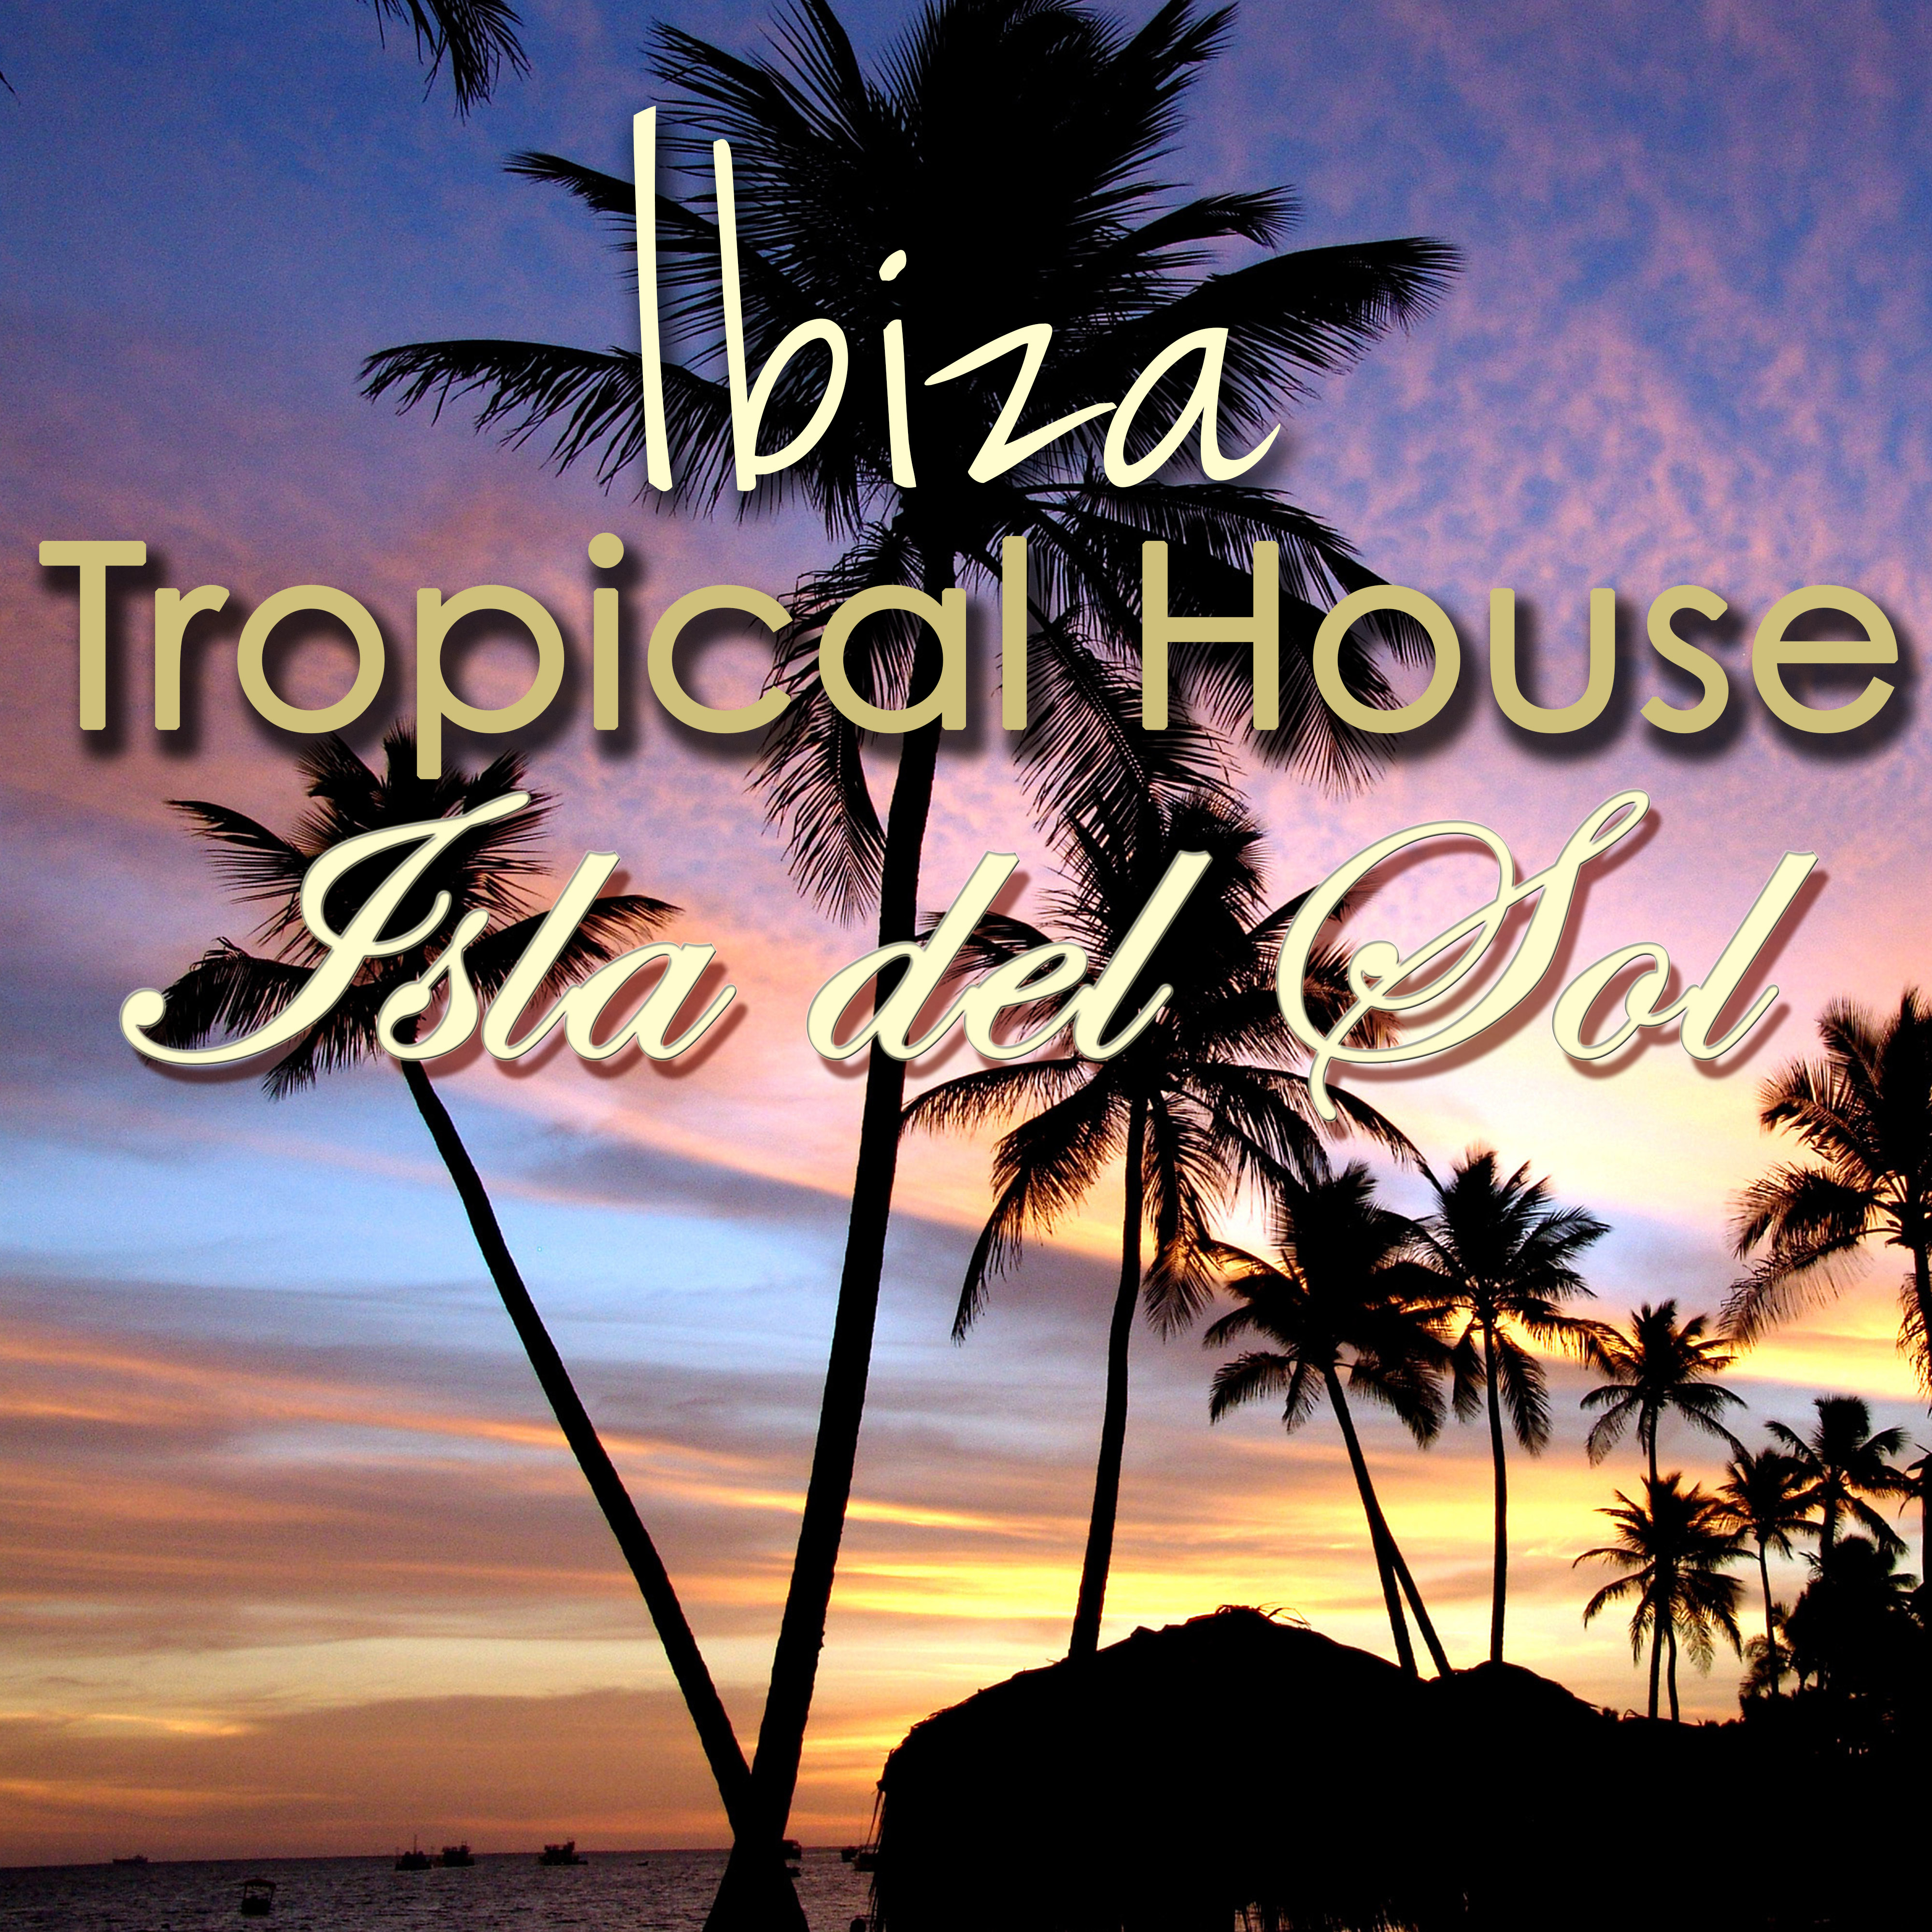 Ibiza Tropical House Isla del Sol -  Chill House Music Cafe 2016 Beach Bar Playa del Mar Collection Compiled by Alex Pasha Dj